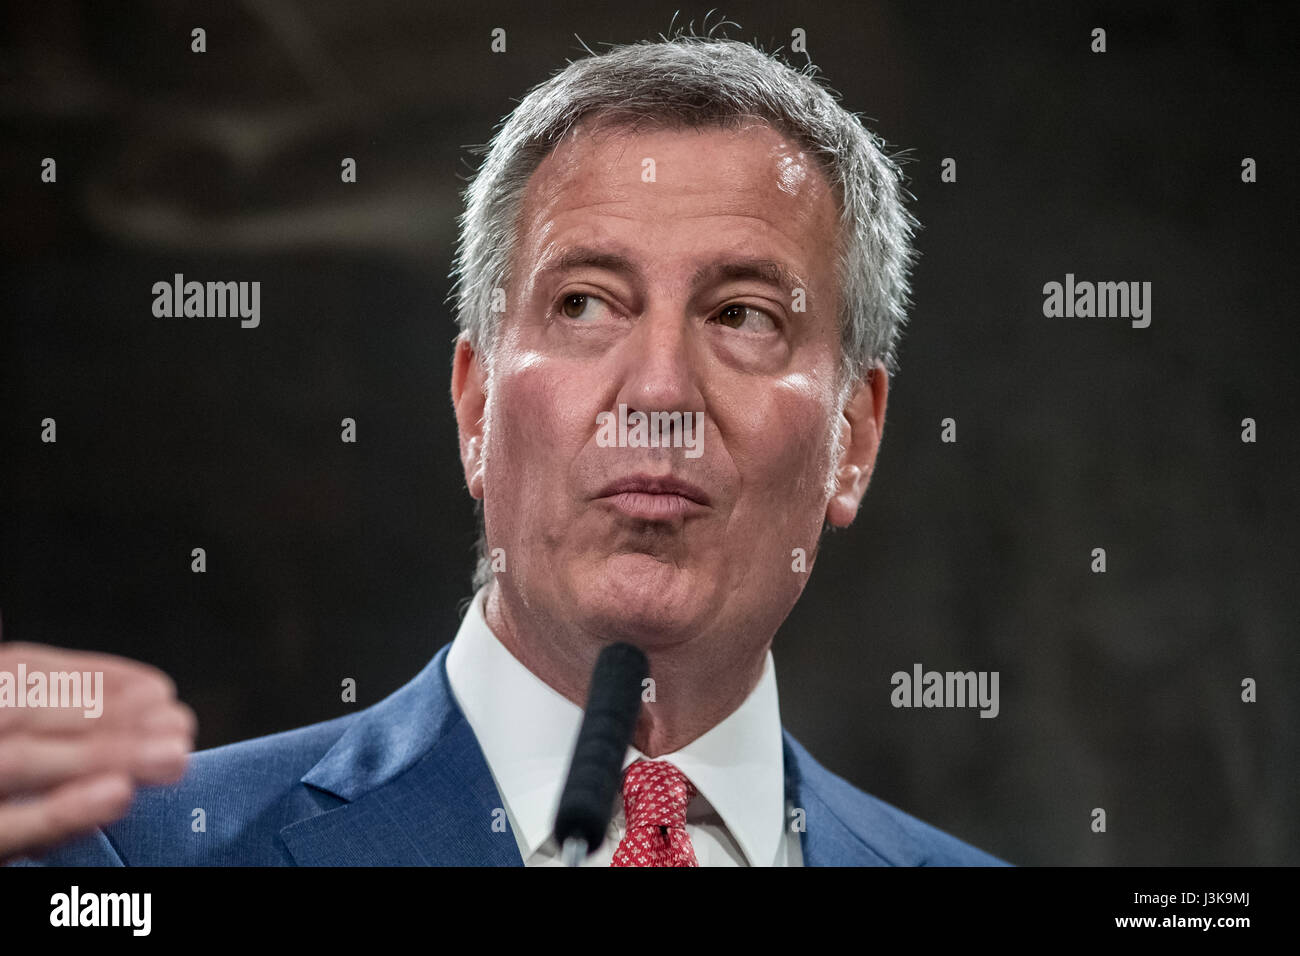 New York, United States. 05th May, 2017. Mayor Bill de Blasio is seen during the press conference. New York City Mayor Bill de Blasio, joined by U.S. Congress members representing districts in New York City, held a press conference in the Blue Room at City Hall to announce a federal budget deal allowing for $68 million of reimbursements by the federal government for the City's expenses in protecting Trump Tower and the Presidential First Family. Credit: Albin Lohr-Jones/Pacific Press/Alamy Live News Stock Photo